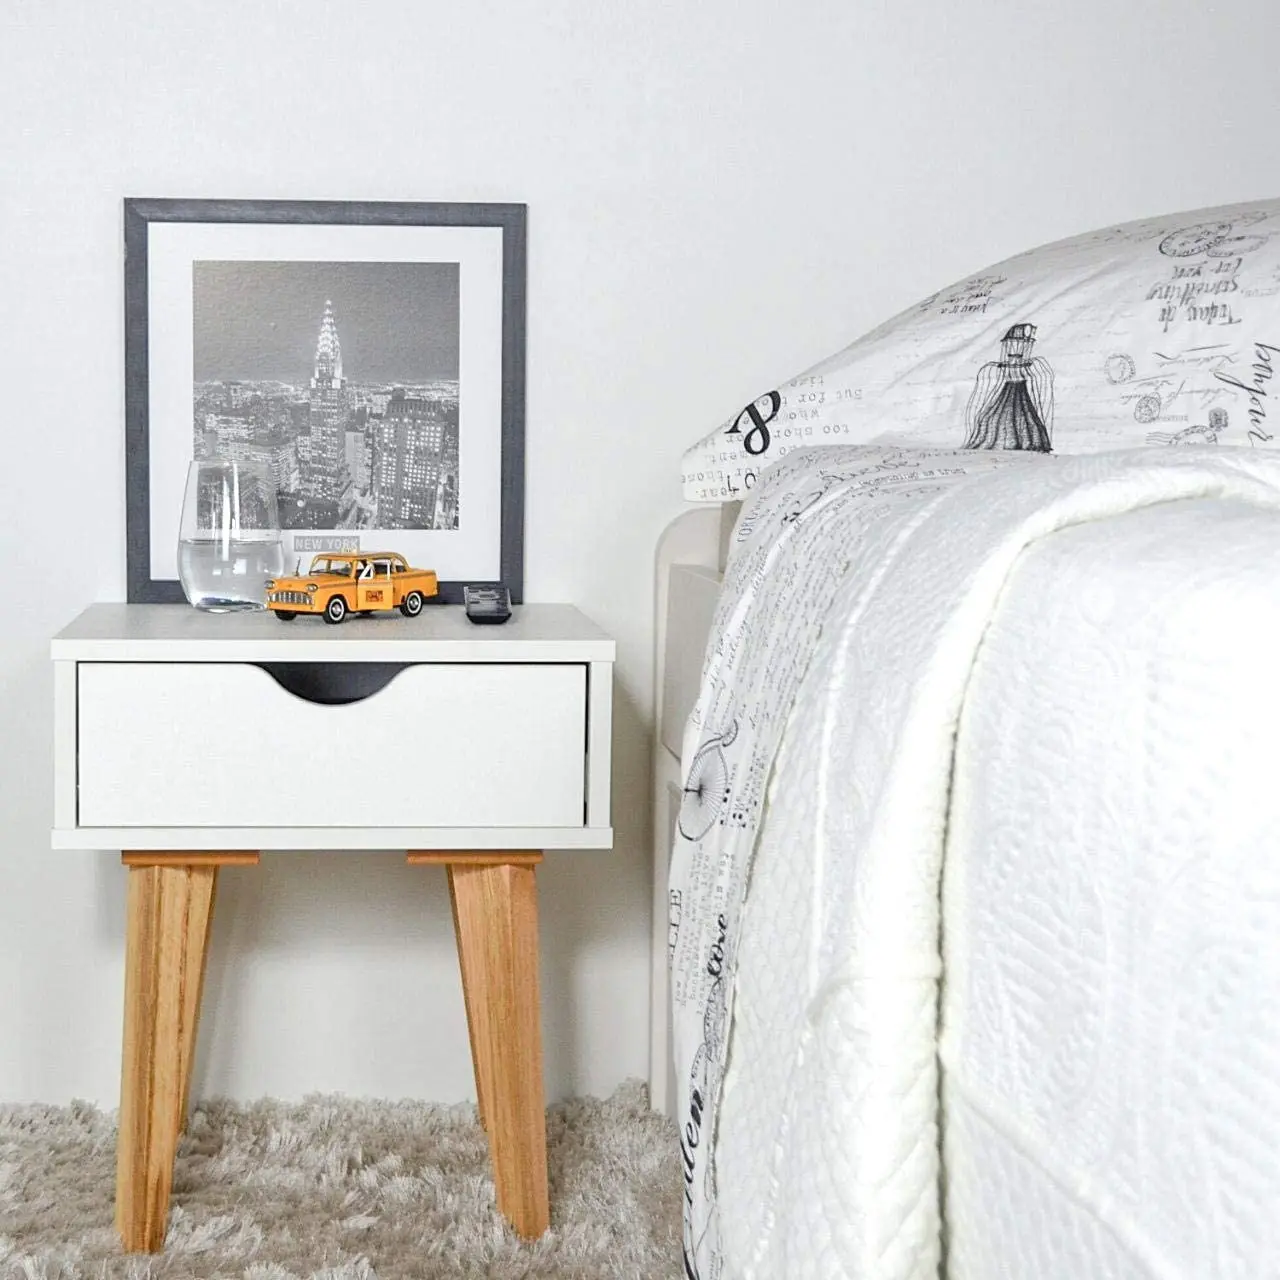 Medieval Modern Nightstand Nightstand - High quality wood - available in black and white natural wood